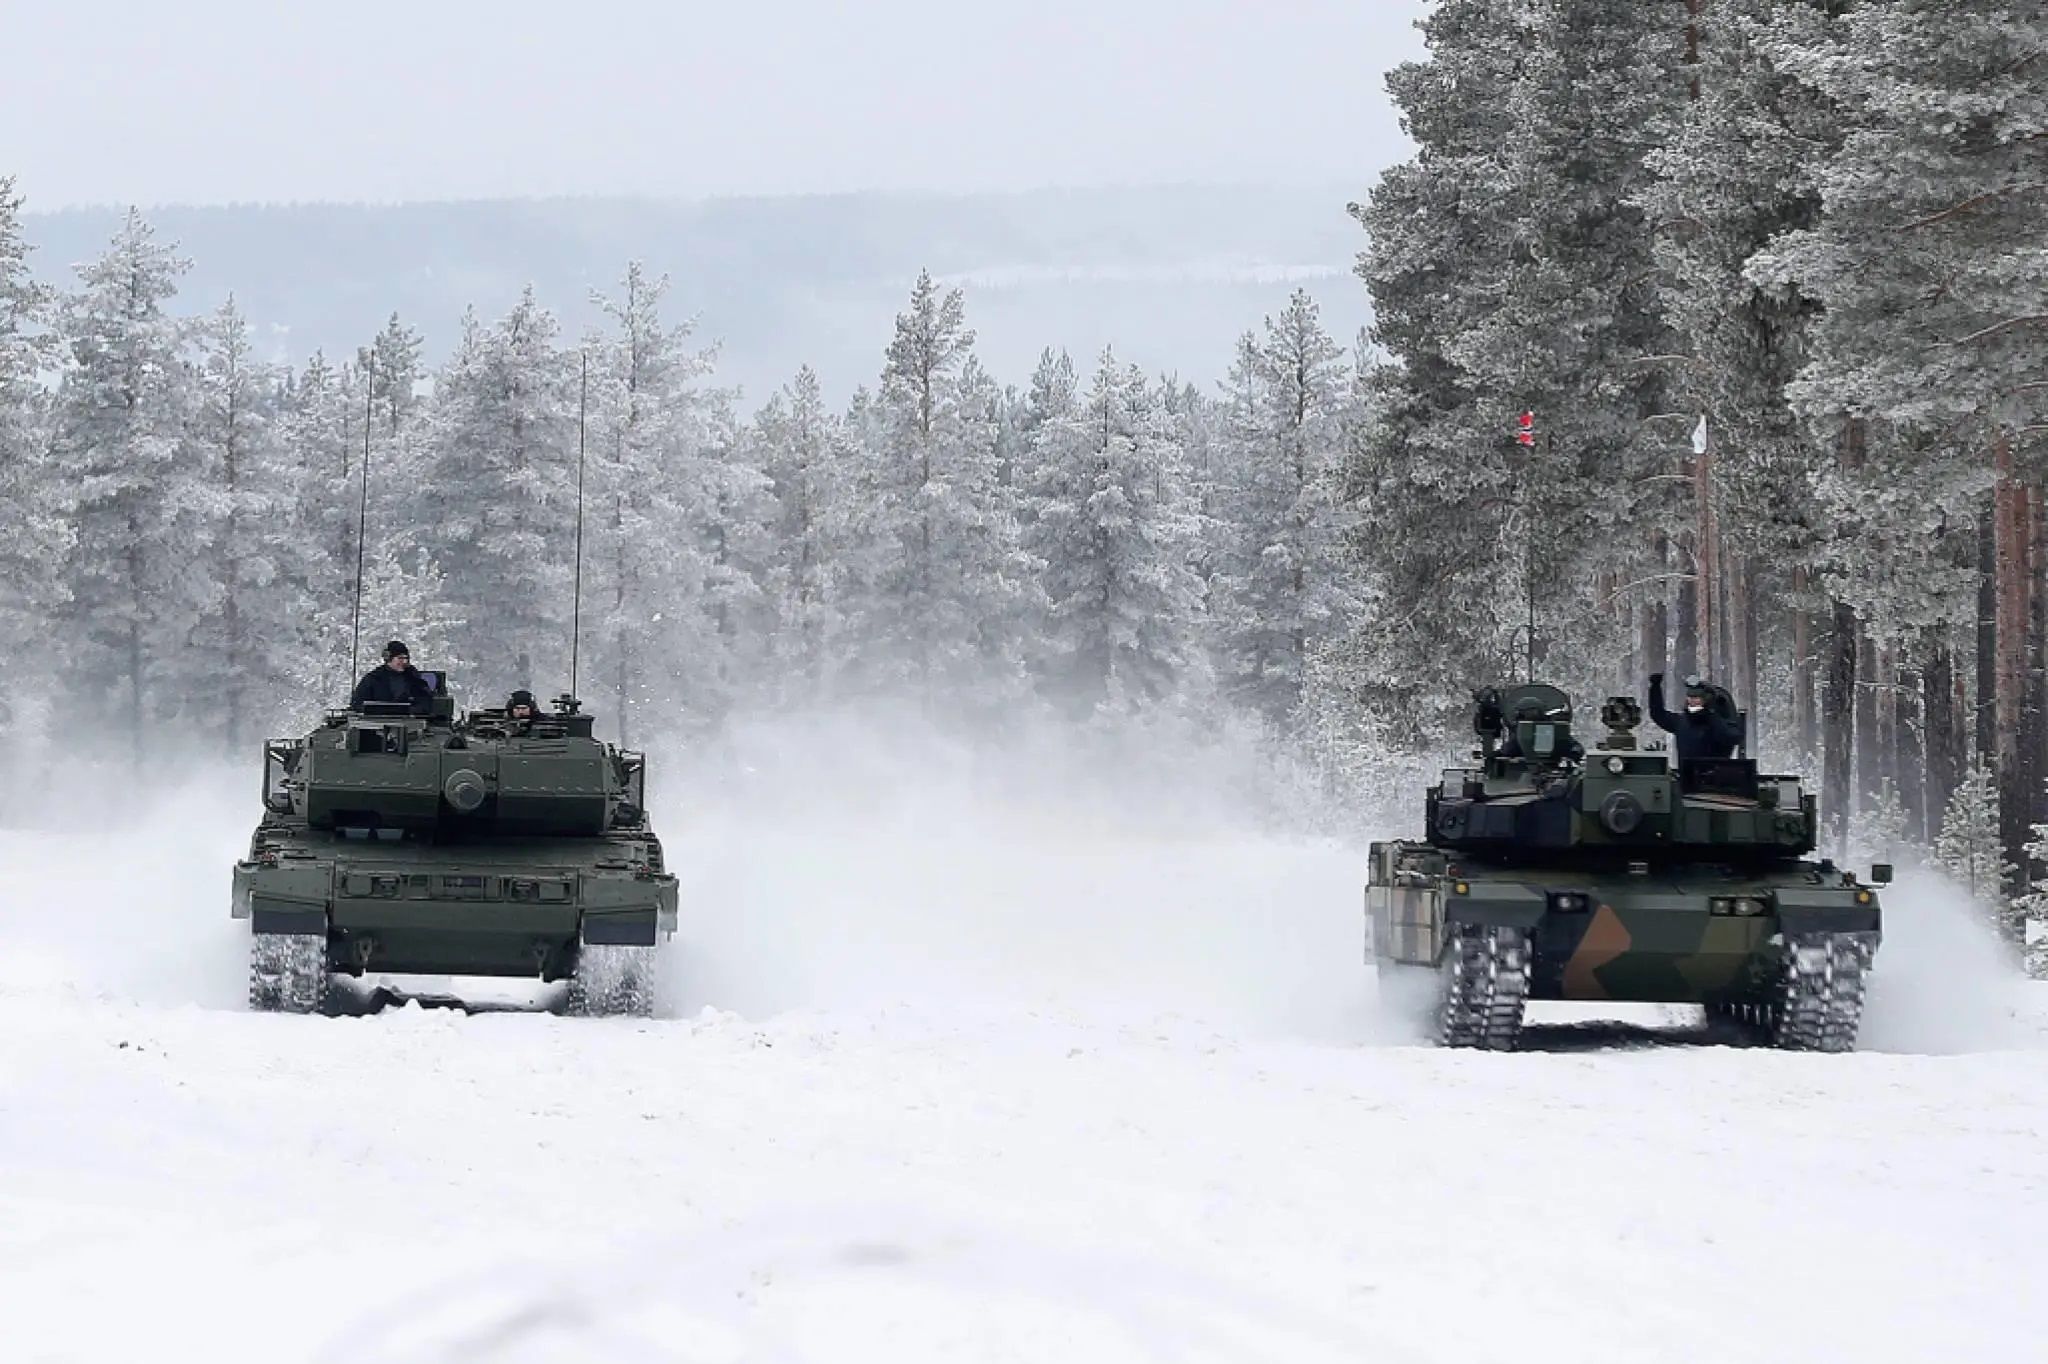 Norway Acquire 54 Leopard 2A7 MBTs to Replace Its Ageing Tank Fleet